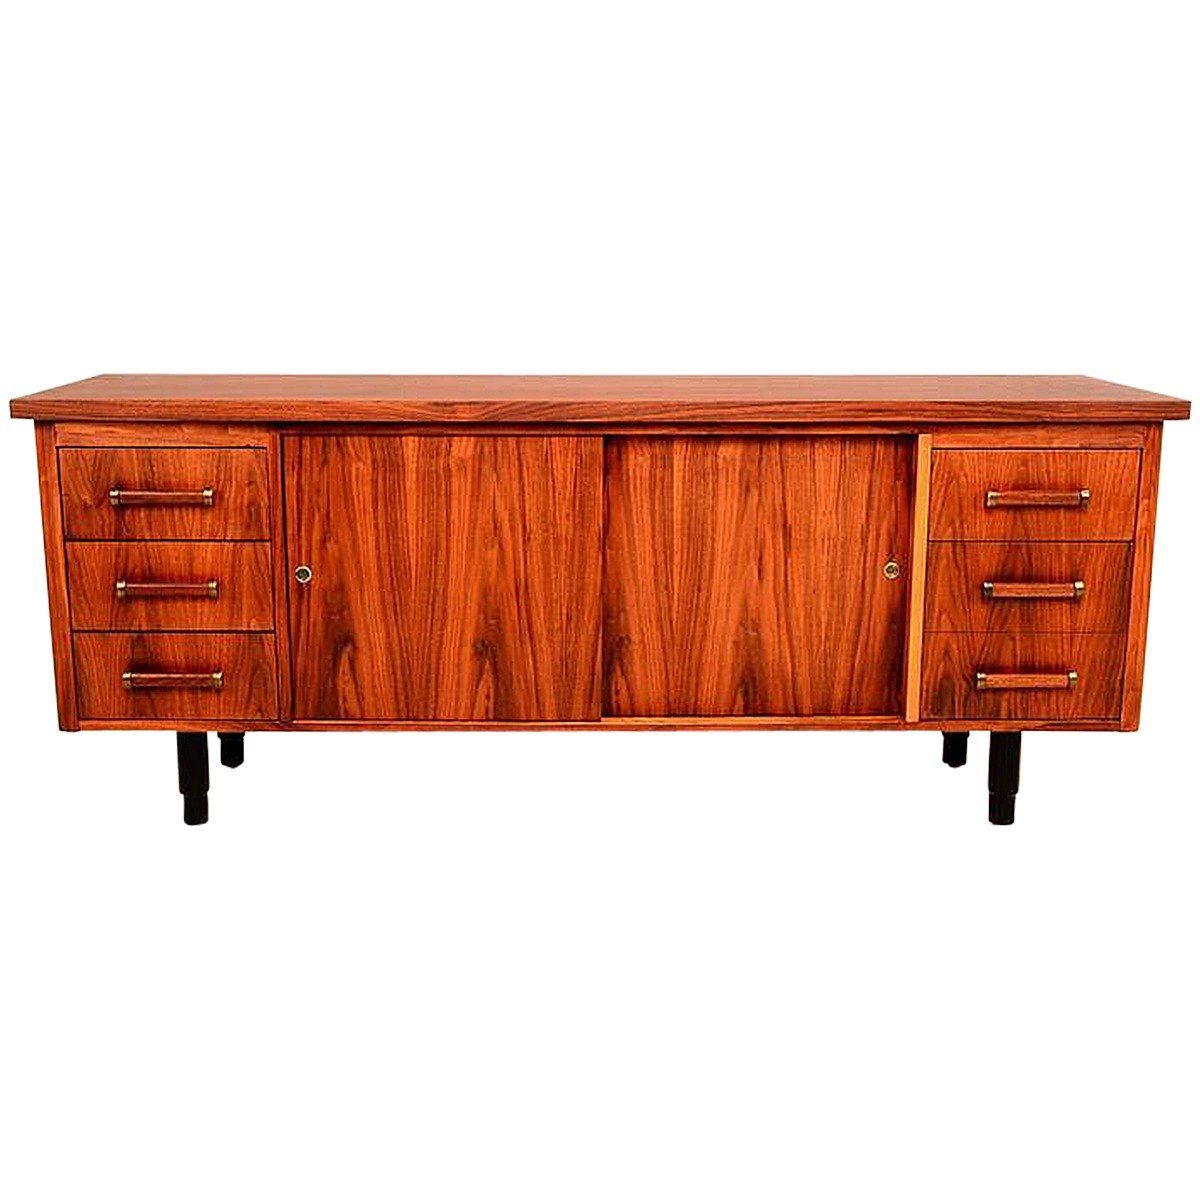 Walnut Office Credenza In Geometric Shapes Credenzas (View 21 of 30)